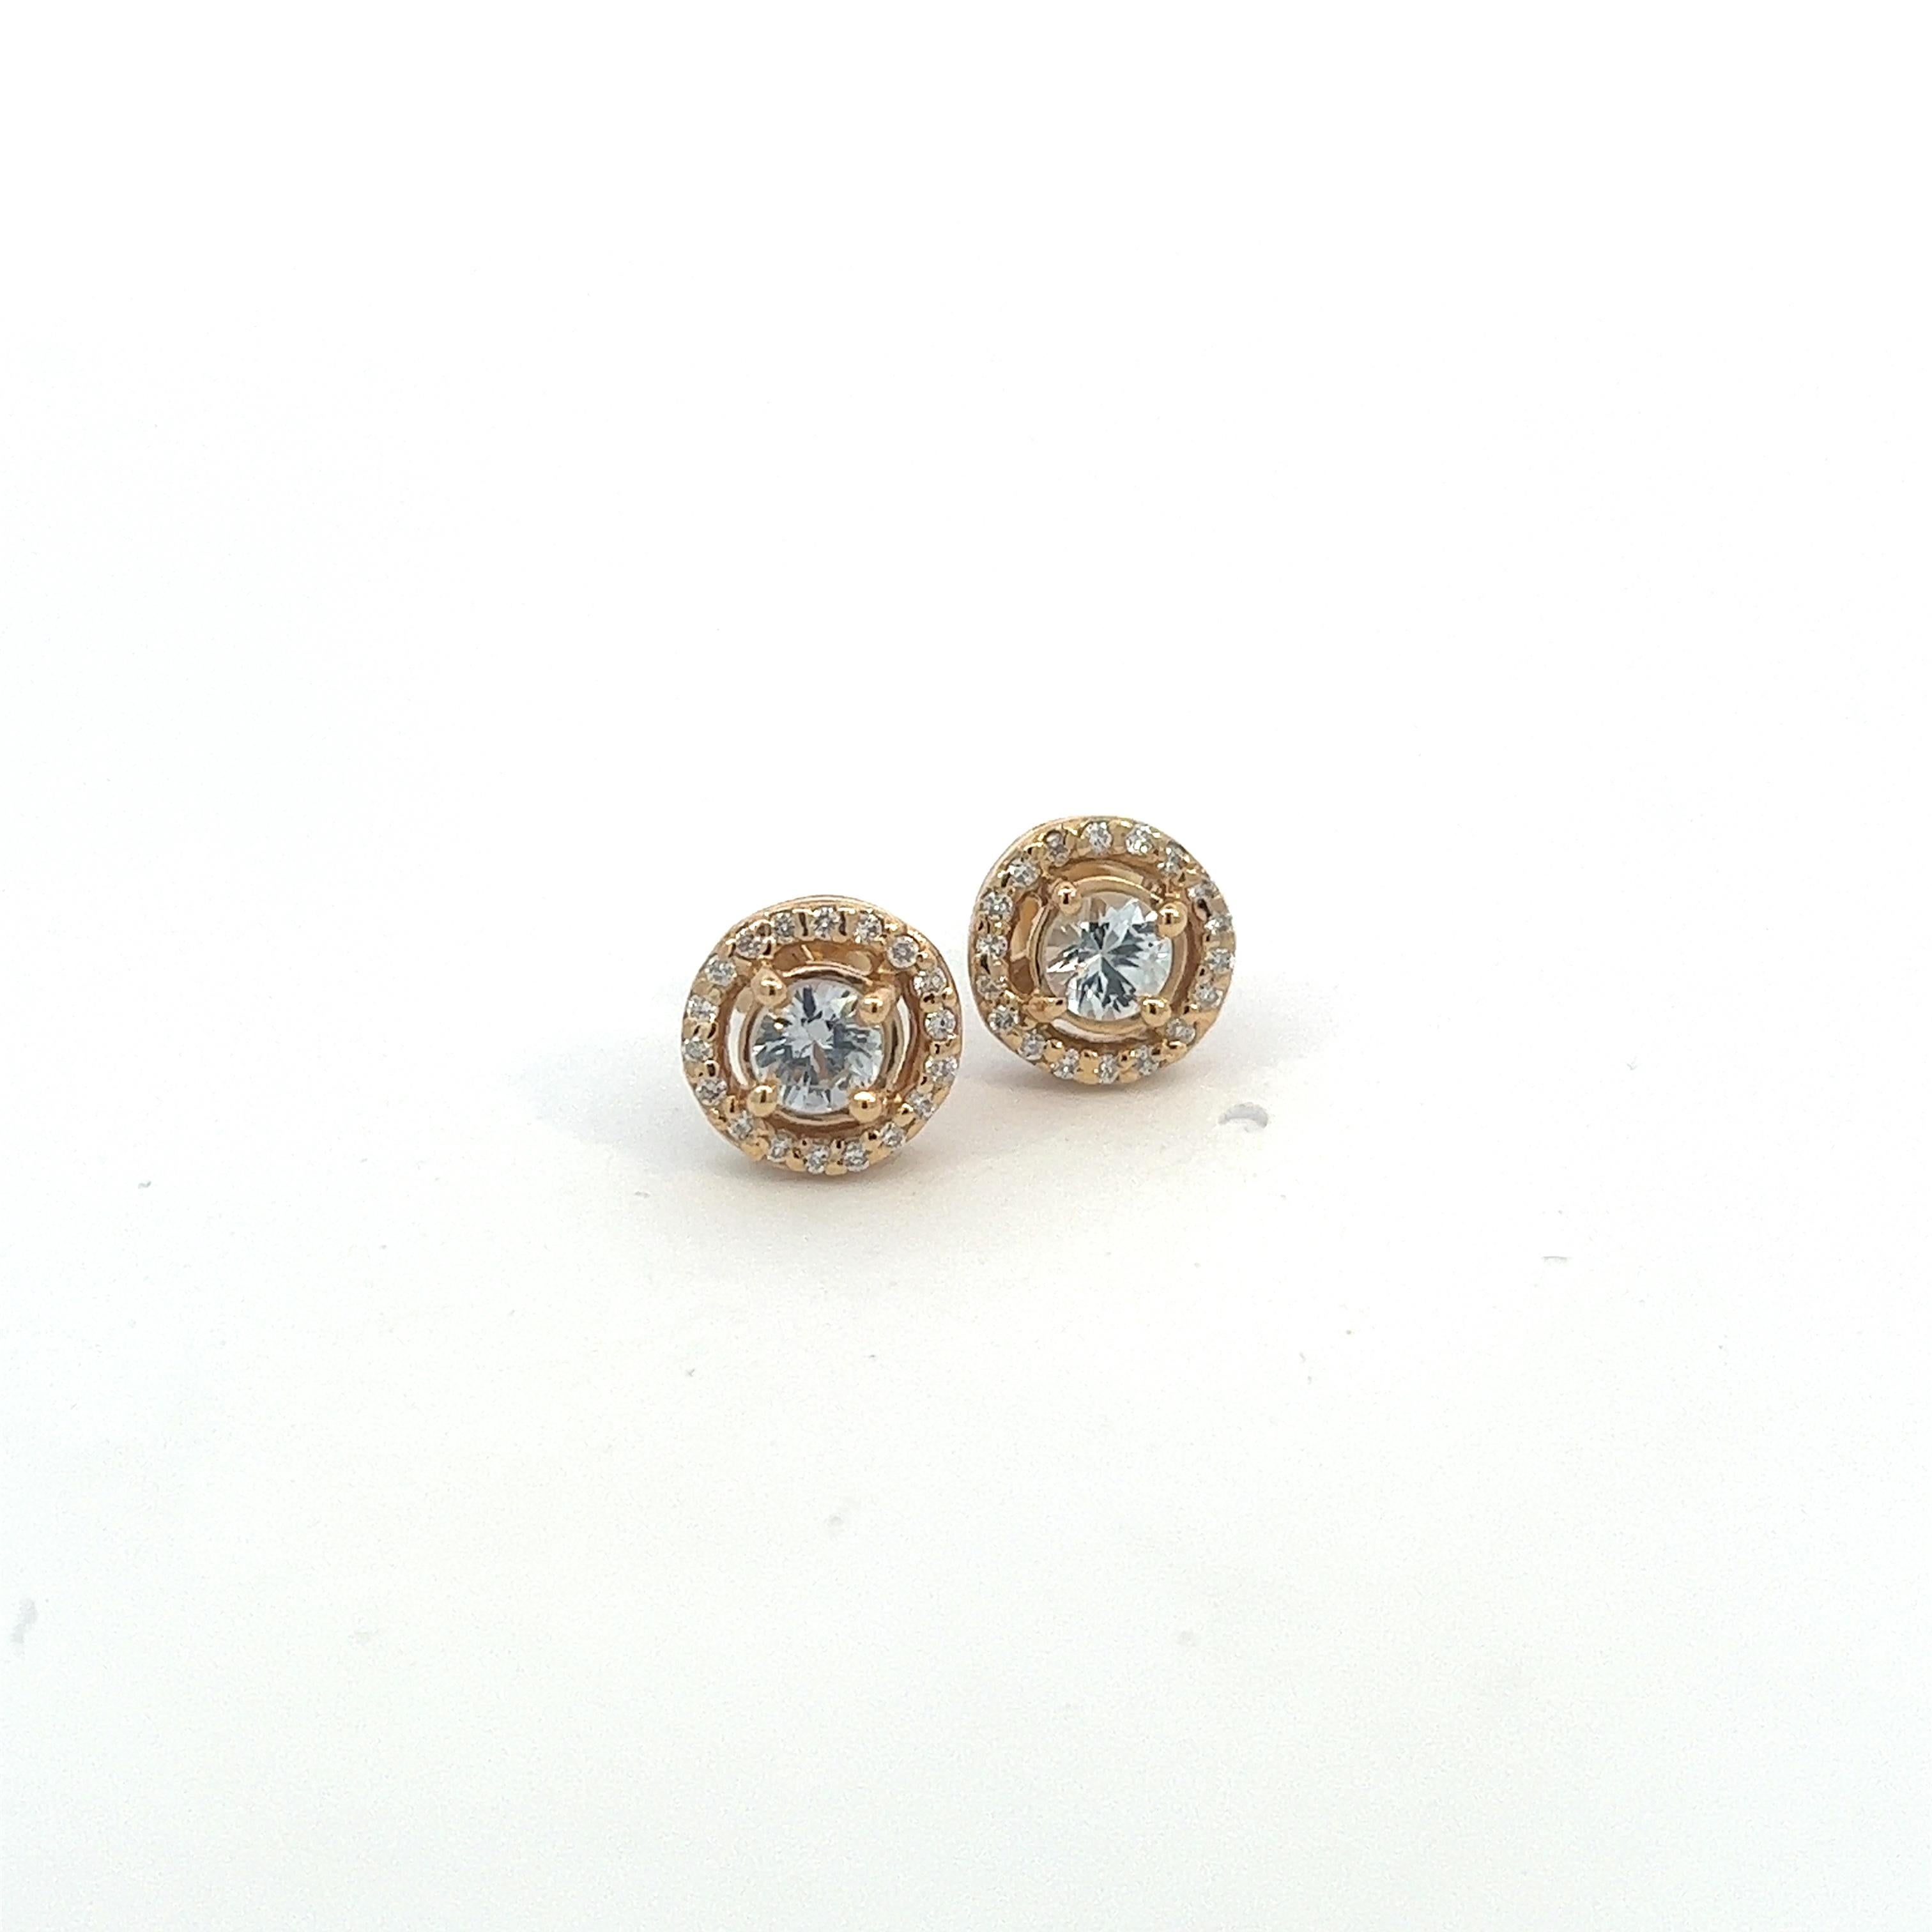 Natural White Sapphire Diamond Stud Earrings 14k Yellow Gold 0.97 TCW Certified $3,075 216092

Nothing says, “I Love you” more than Diamonds and Pearls!

These Sapphire earrings have been Certified, Inspected, and Appraised by Gemological Appraisal